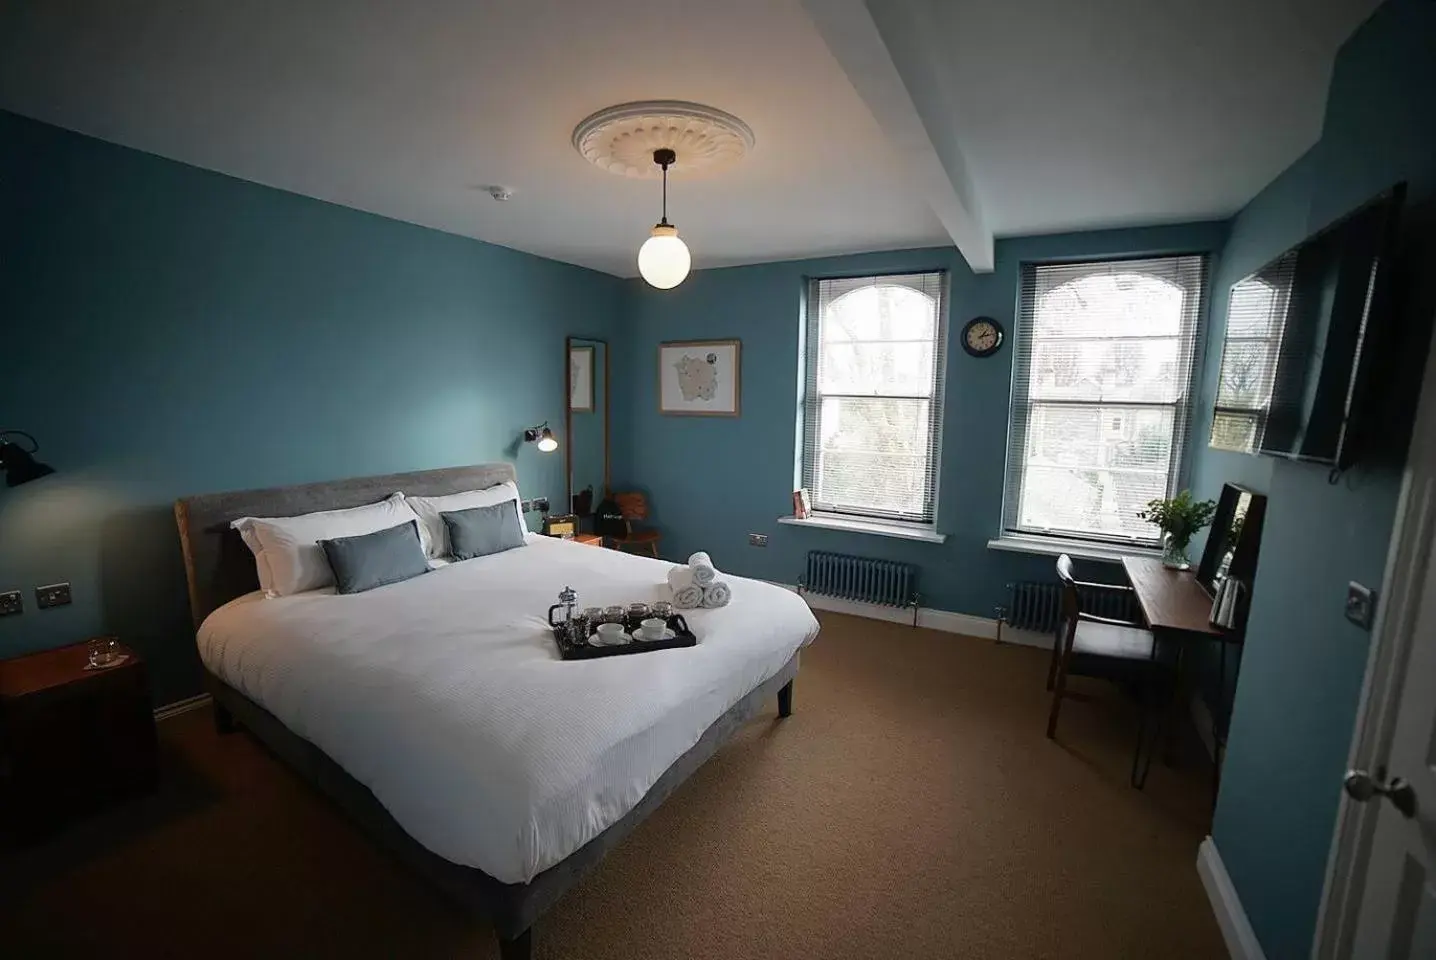  Double Room in The Alma Taverns Boutique Suites - Room 1 - Hopewell